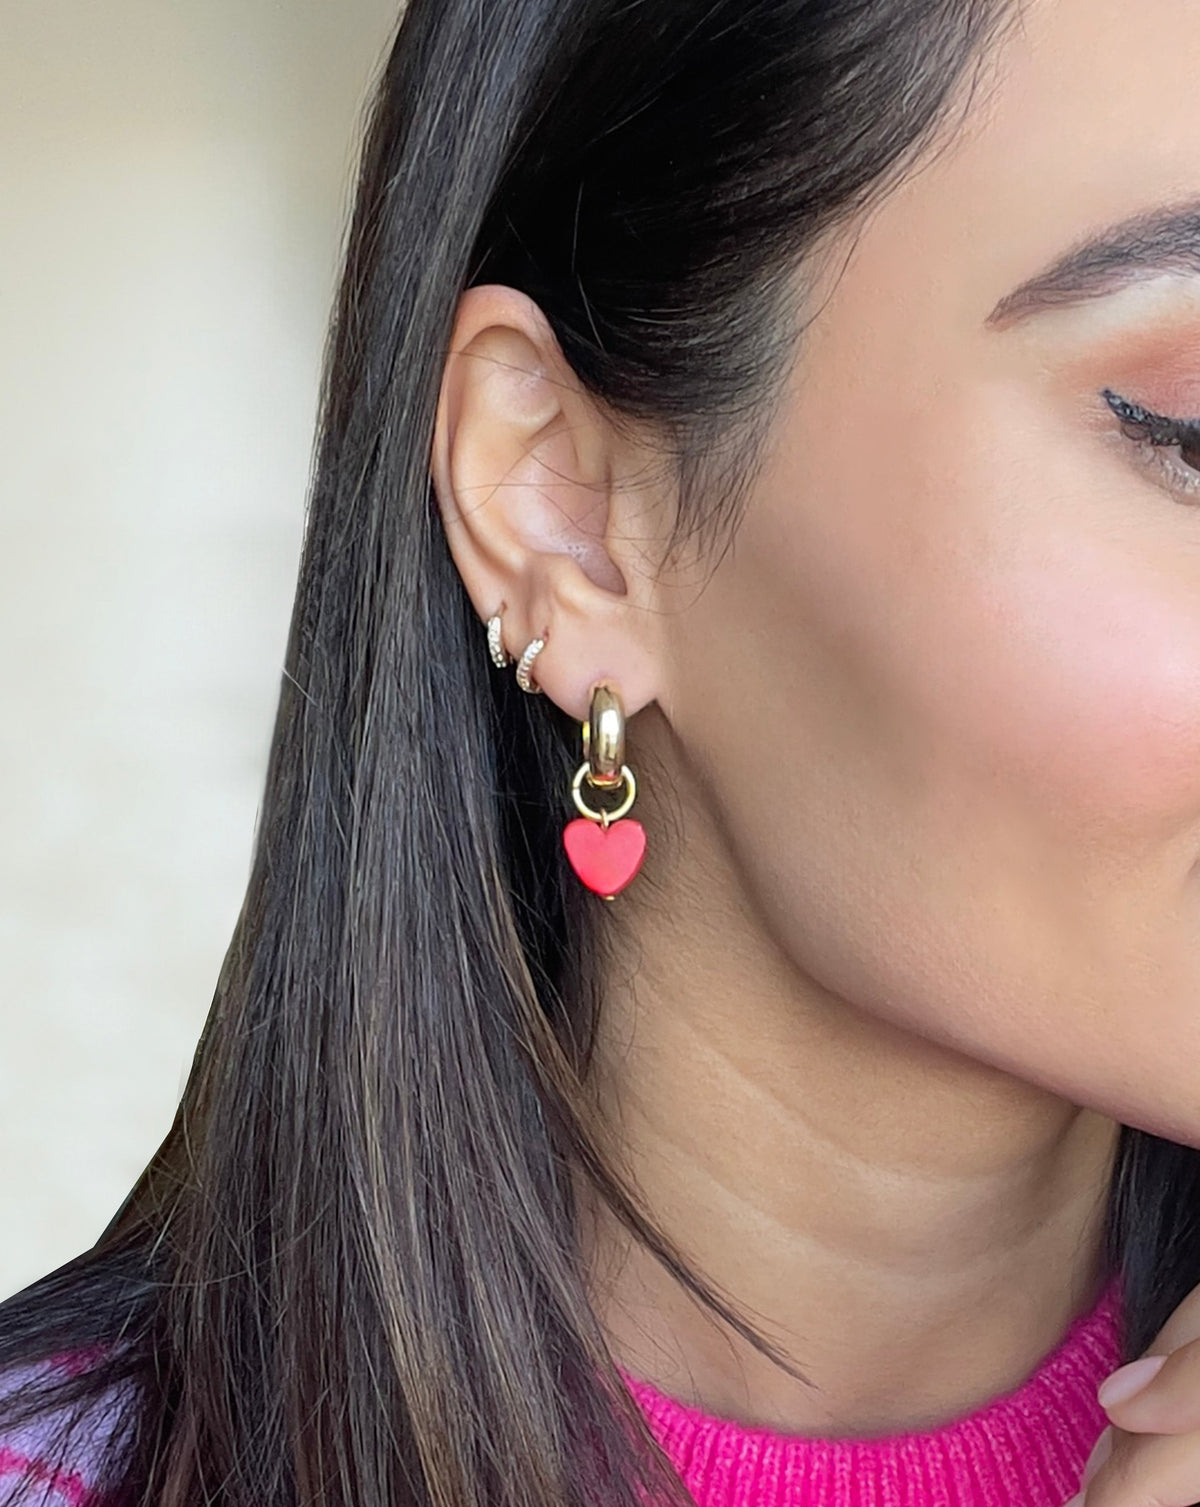 LYHO charming heart earrings in color red with gold hoops, on model.